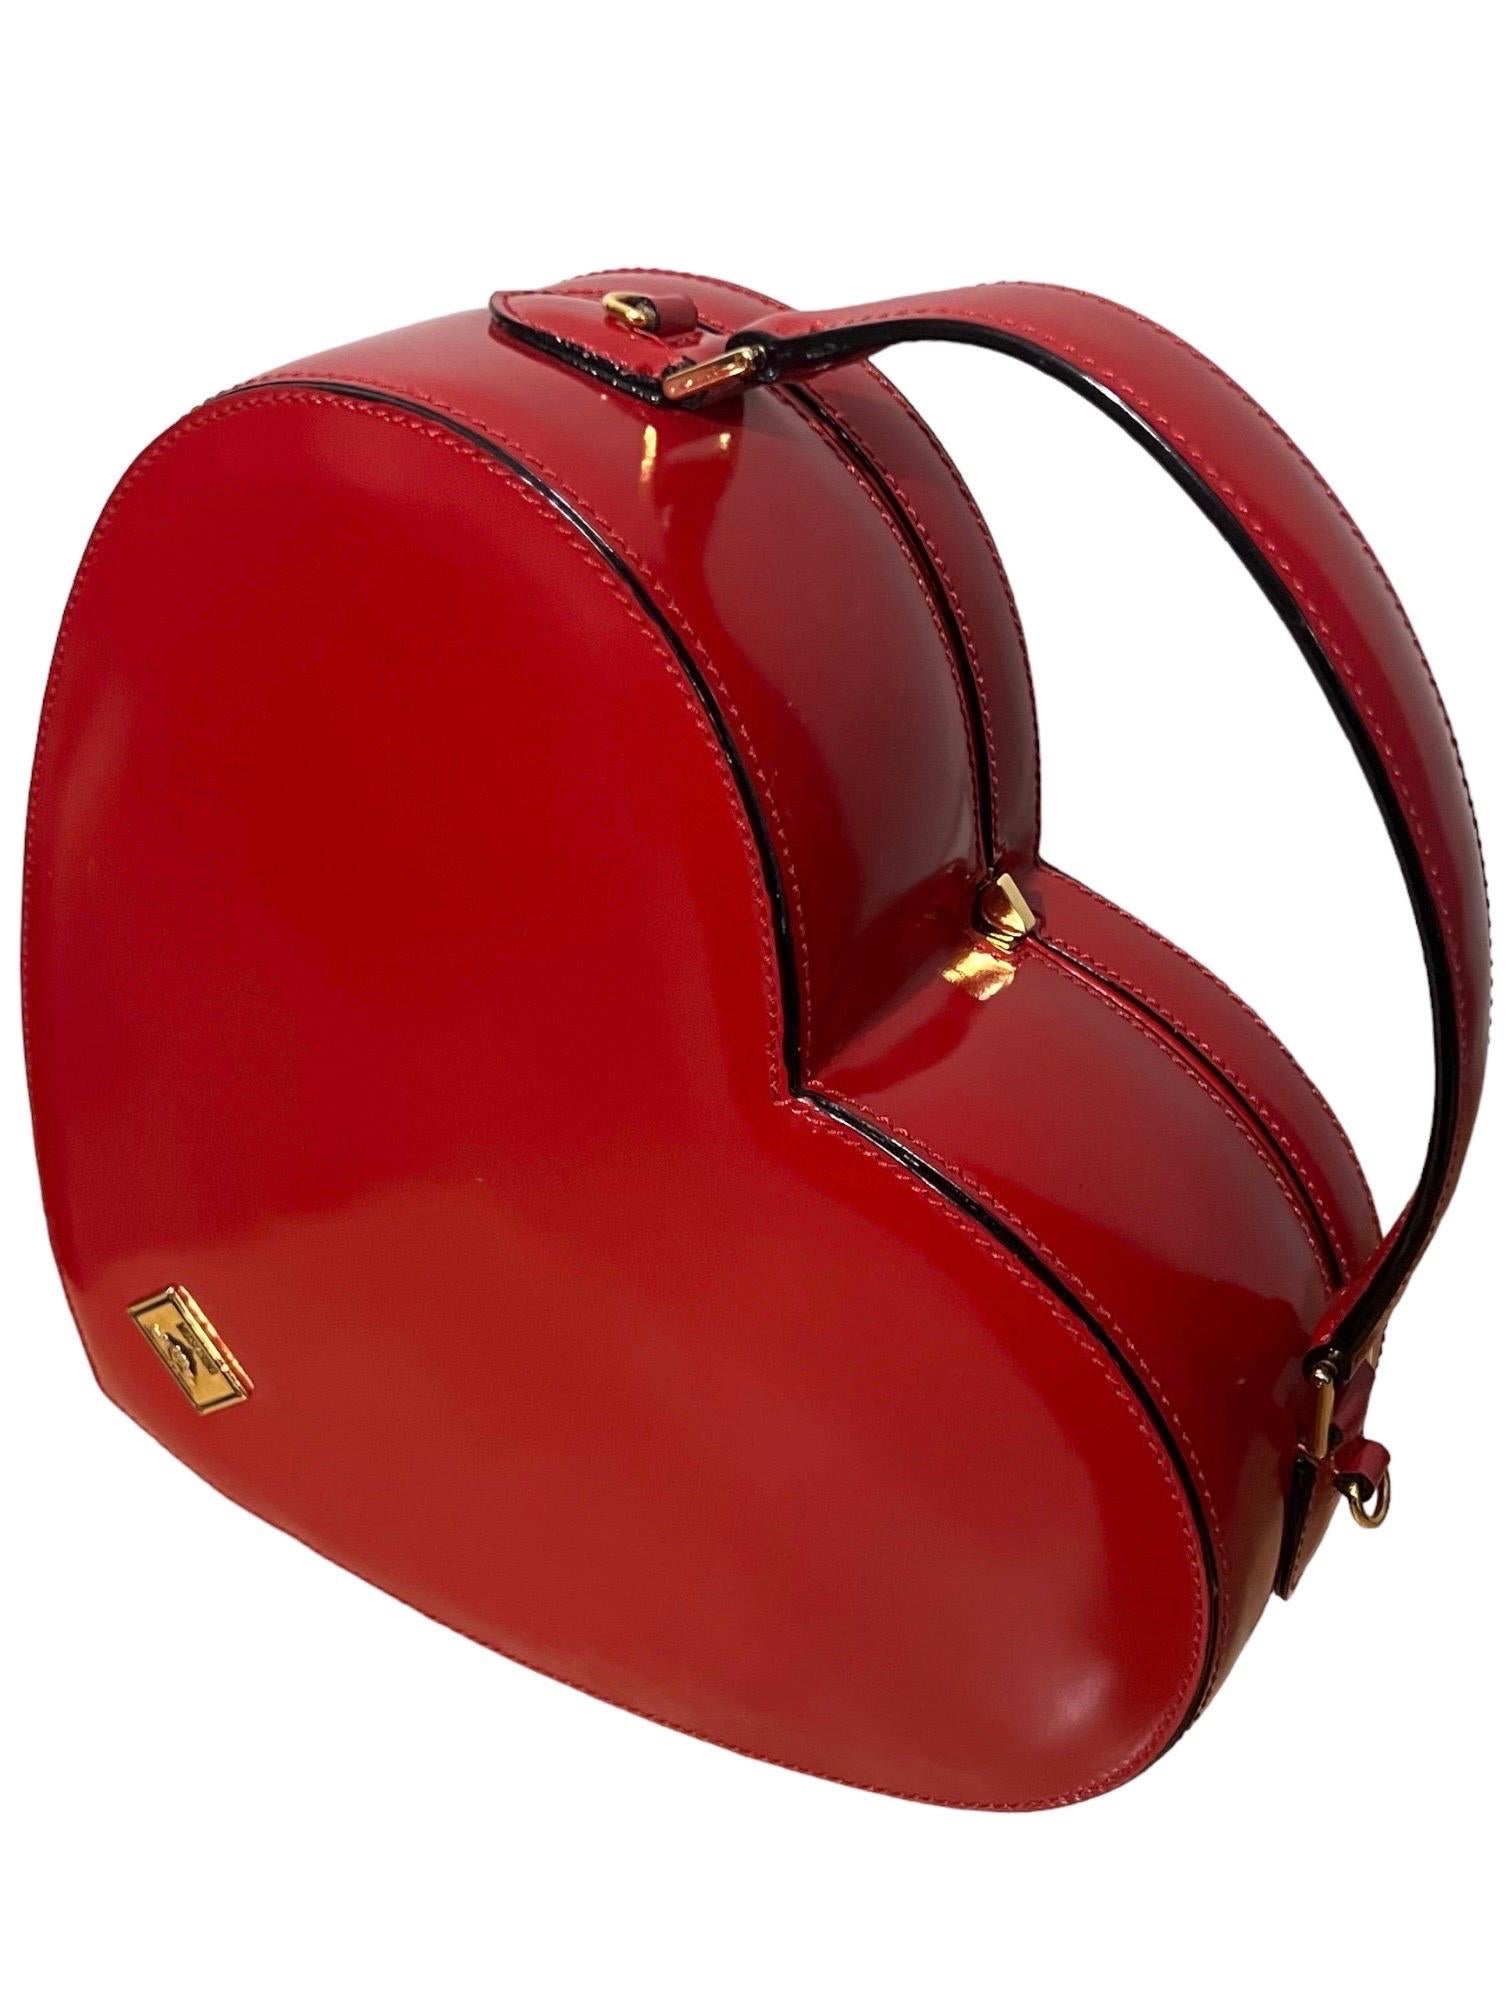 Moschino Vintage Red Leather Heart Bag The Nanny 7